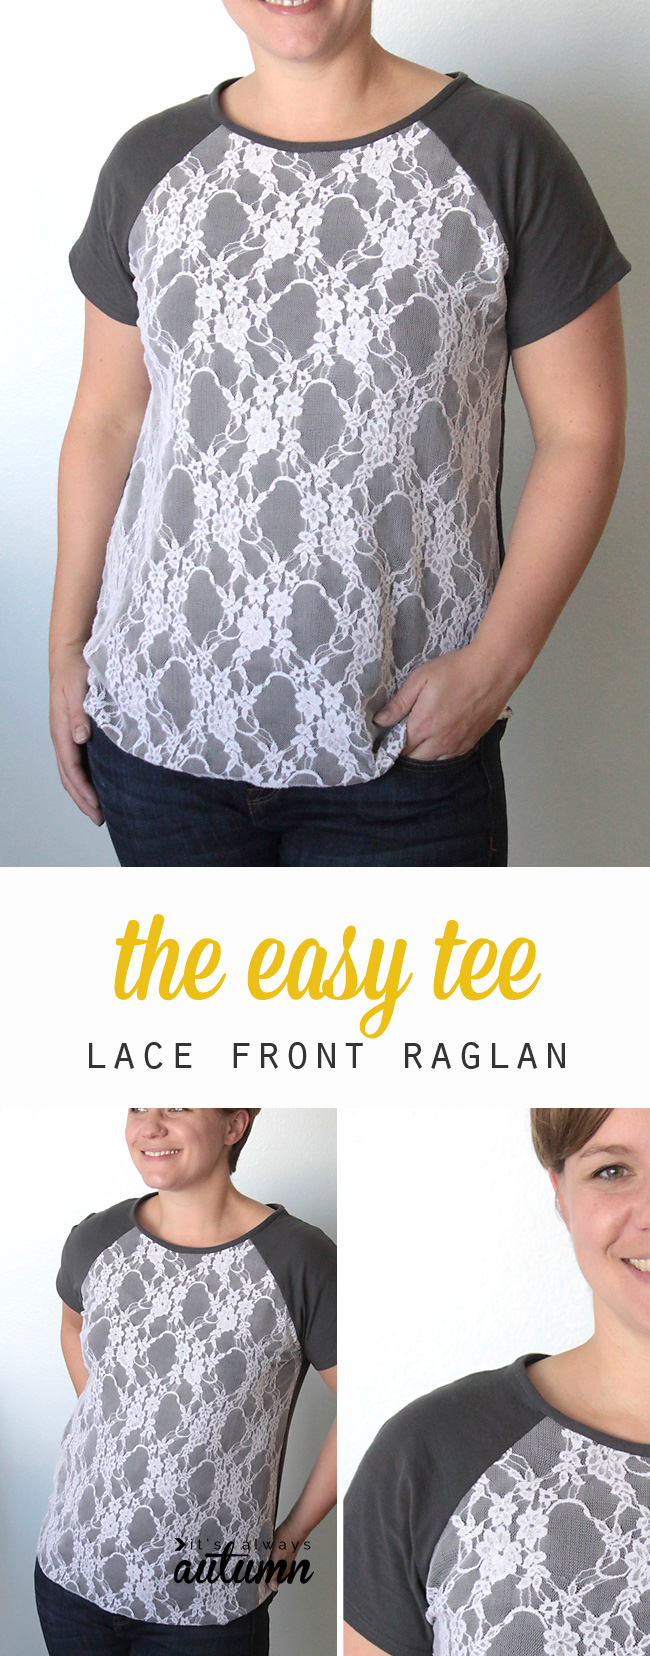 Free pattern and sewing tutorial for this pretty lace front raglan tee for women.